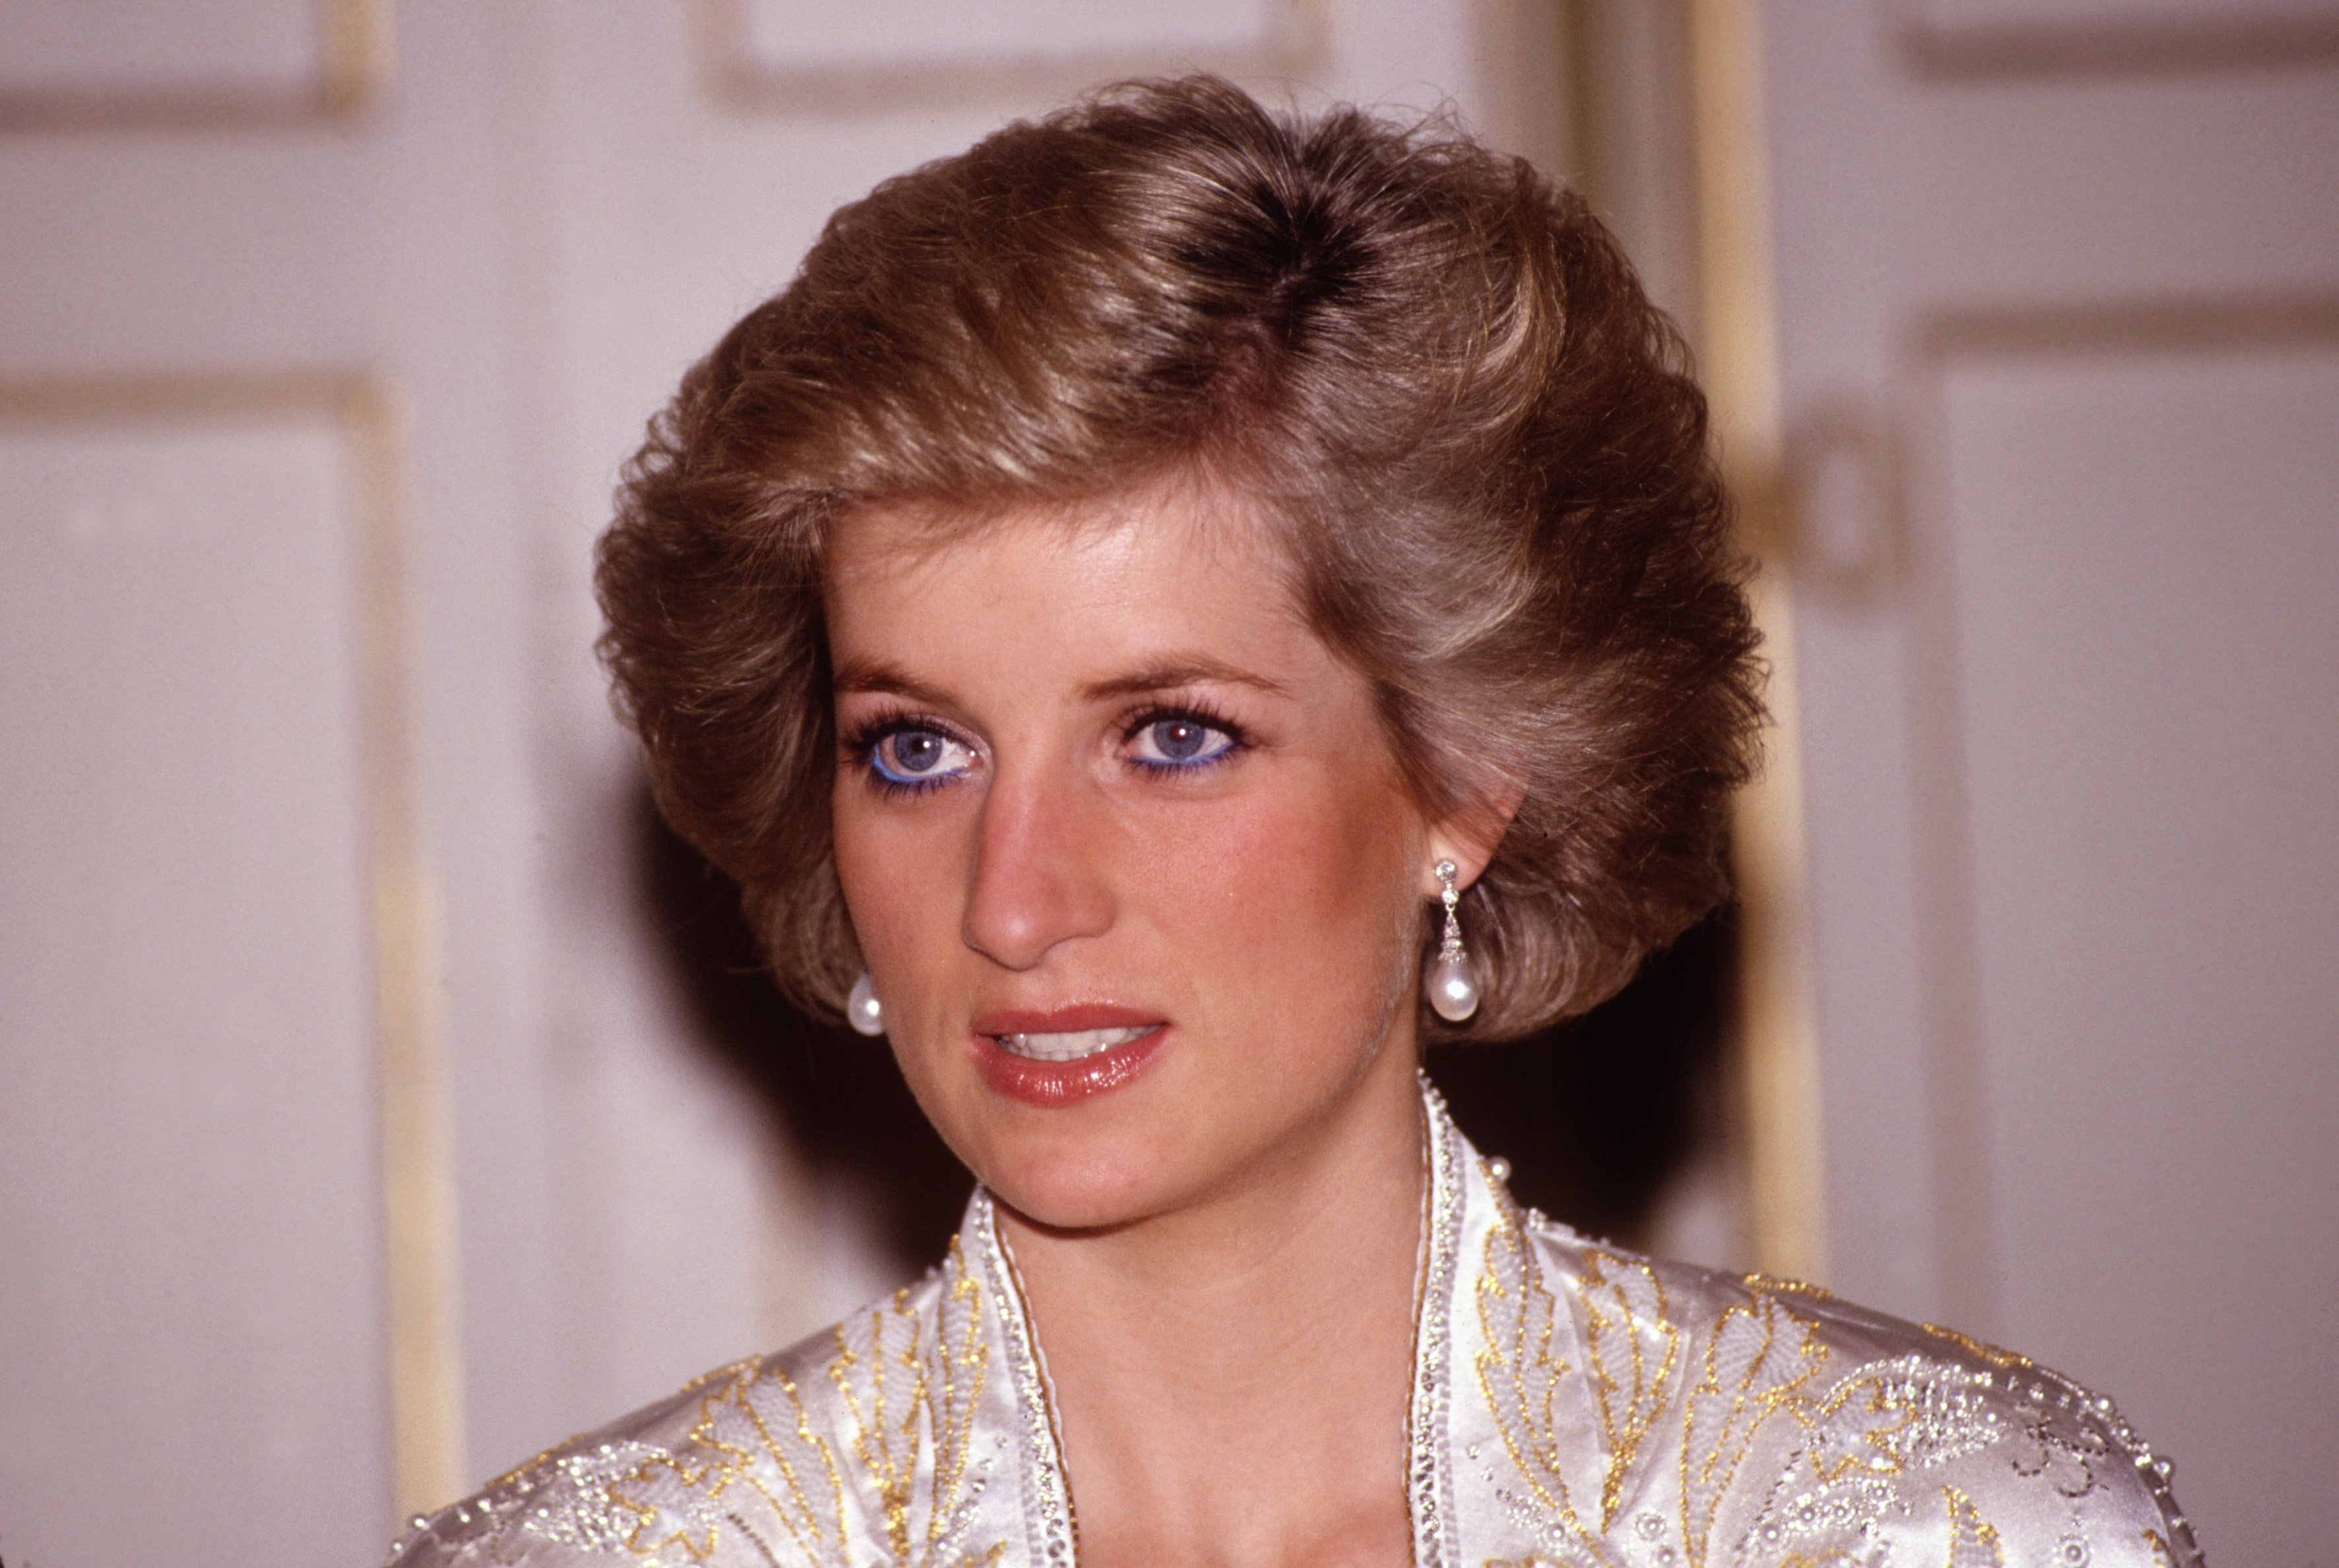 Princess Diana in November 1988 at the Elysée Palace in Paris, France |  Source: Getty Images